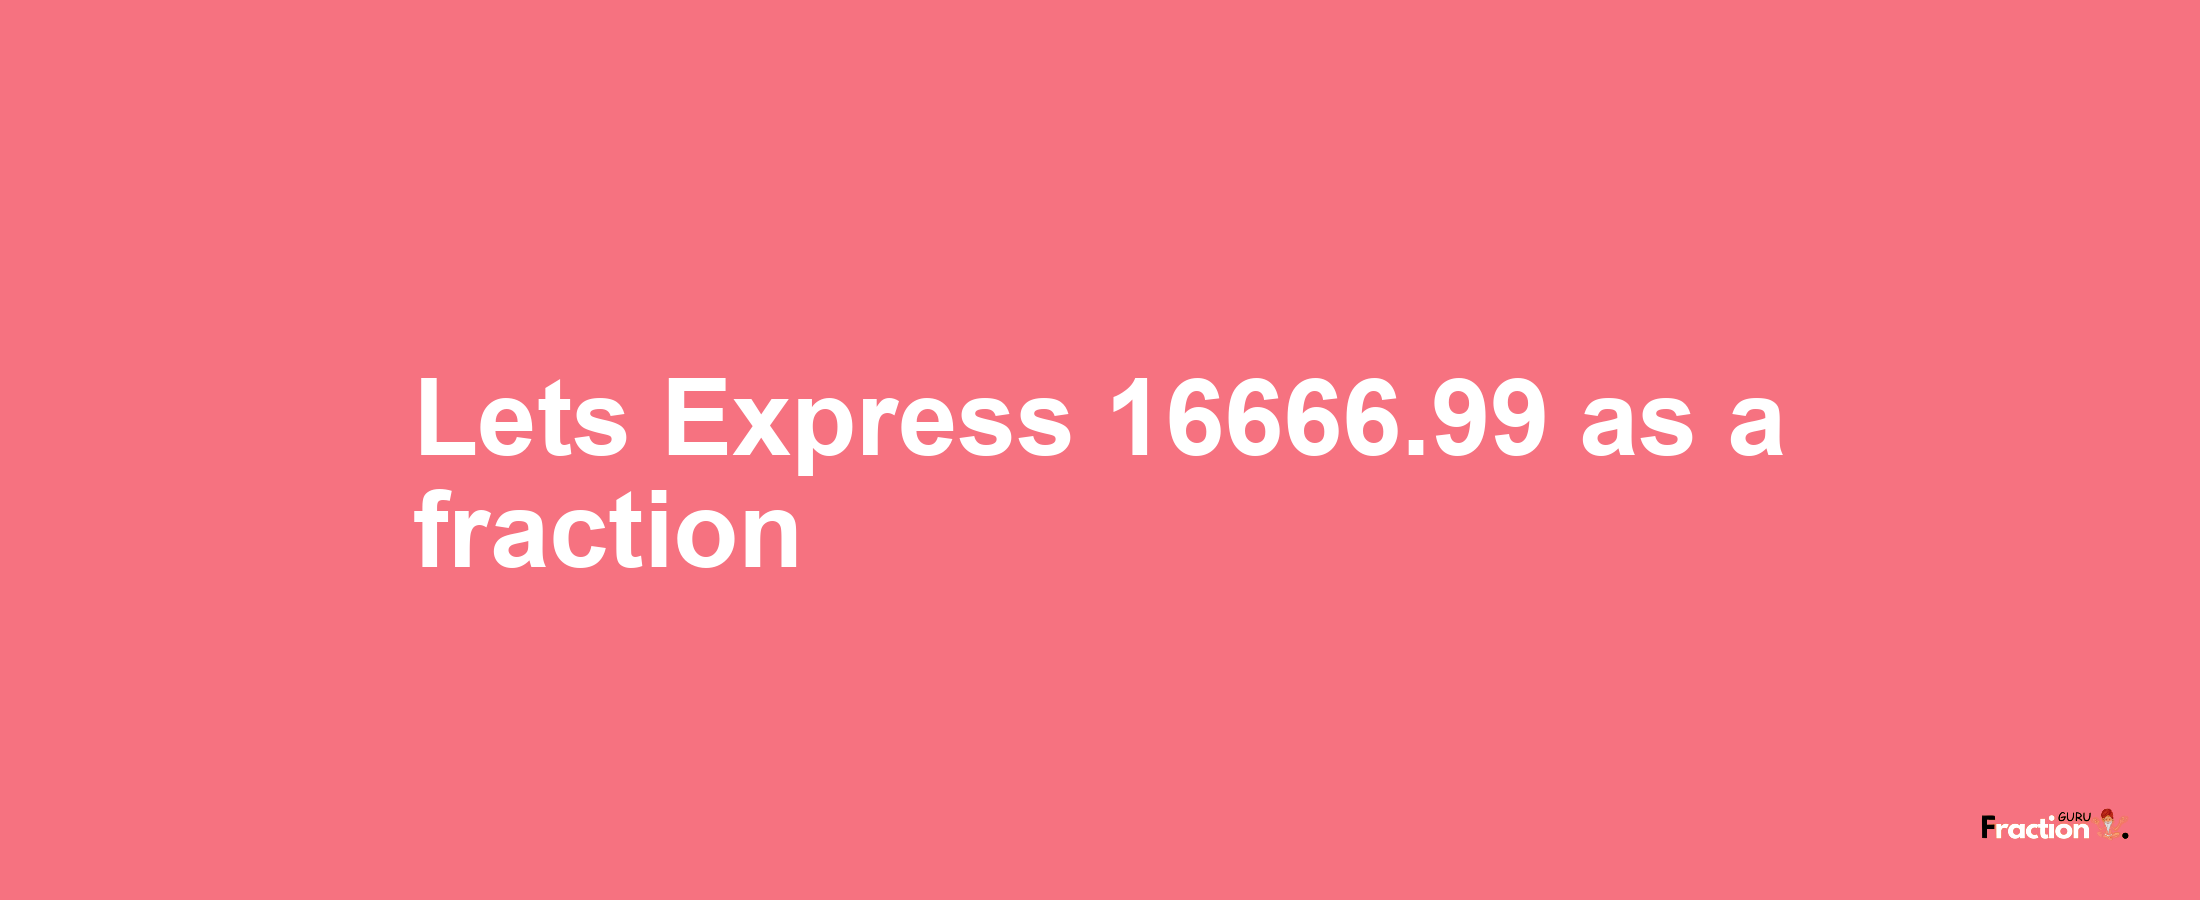 Lets Express 16666.99 as afraction